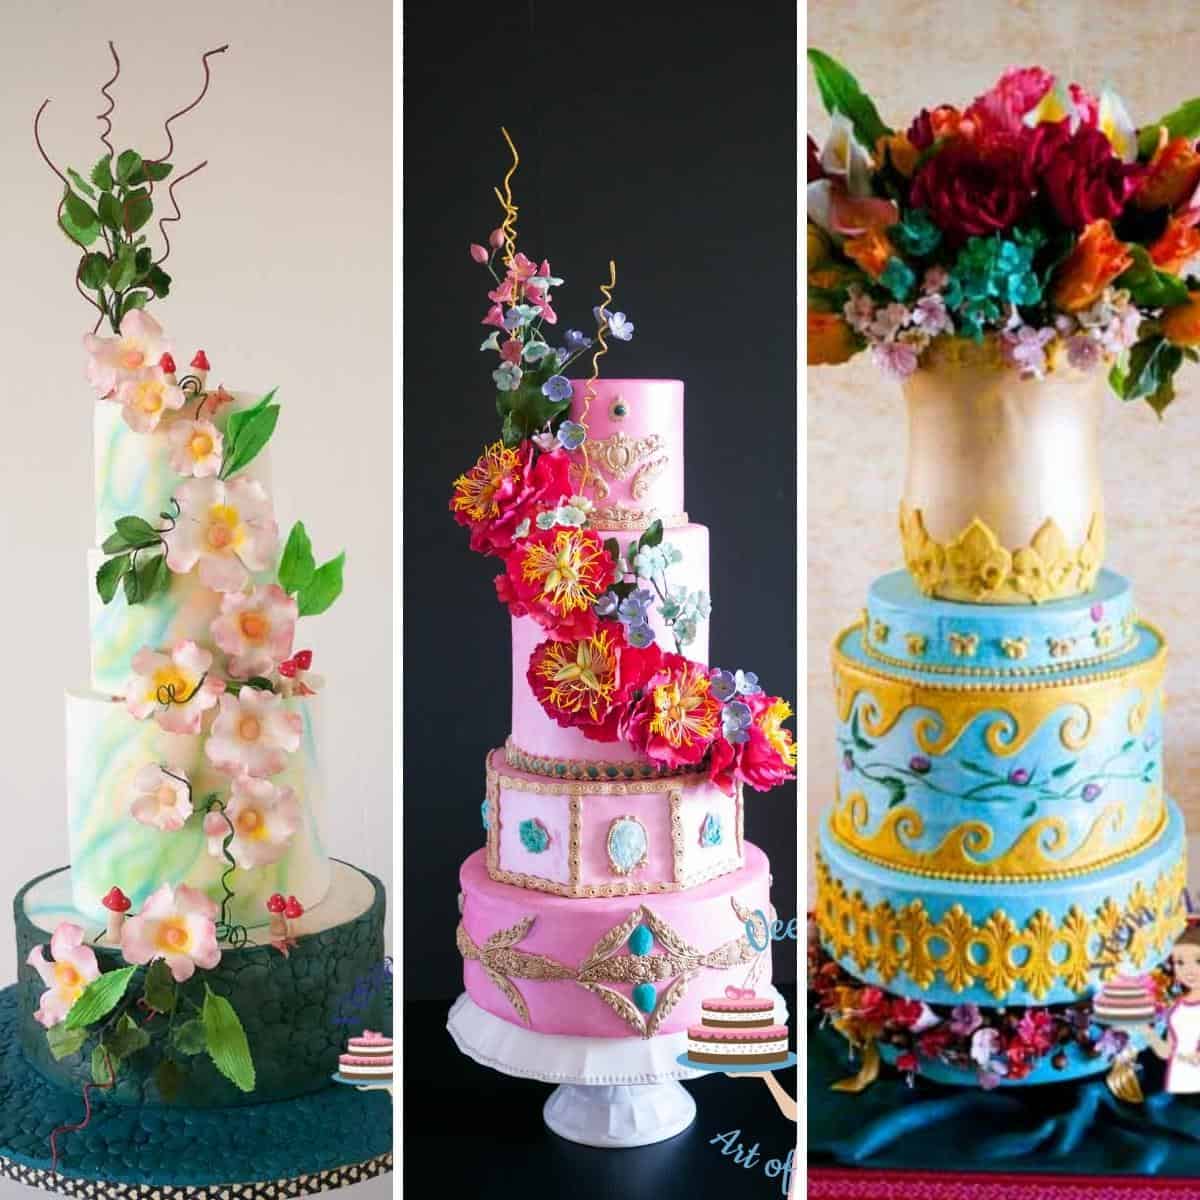 Which Online Cake Decorating Schools Should I join?